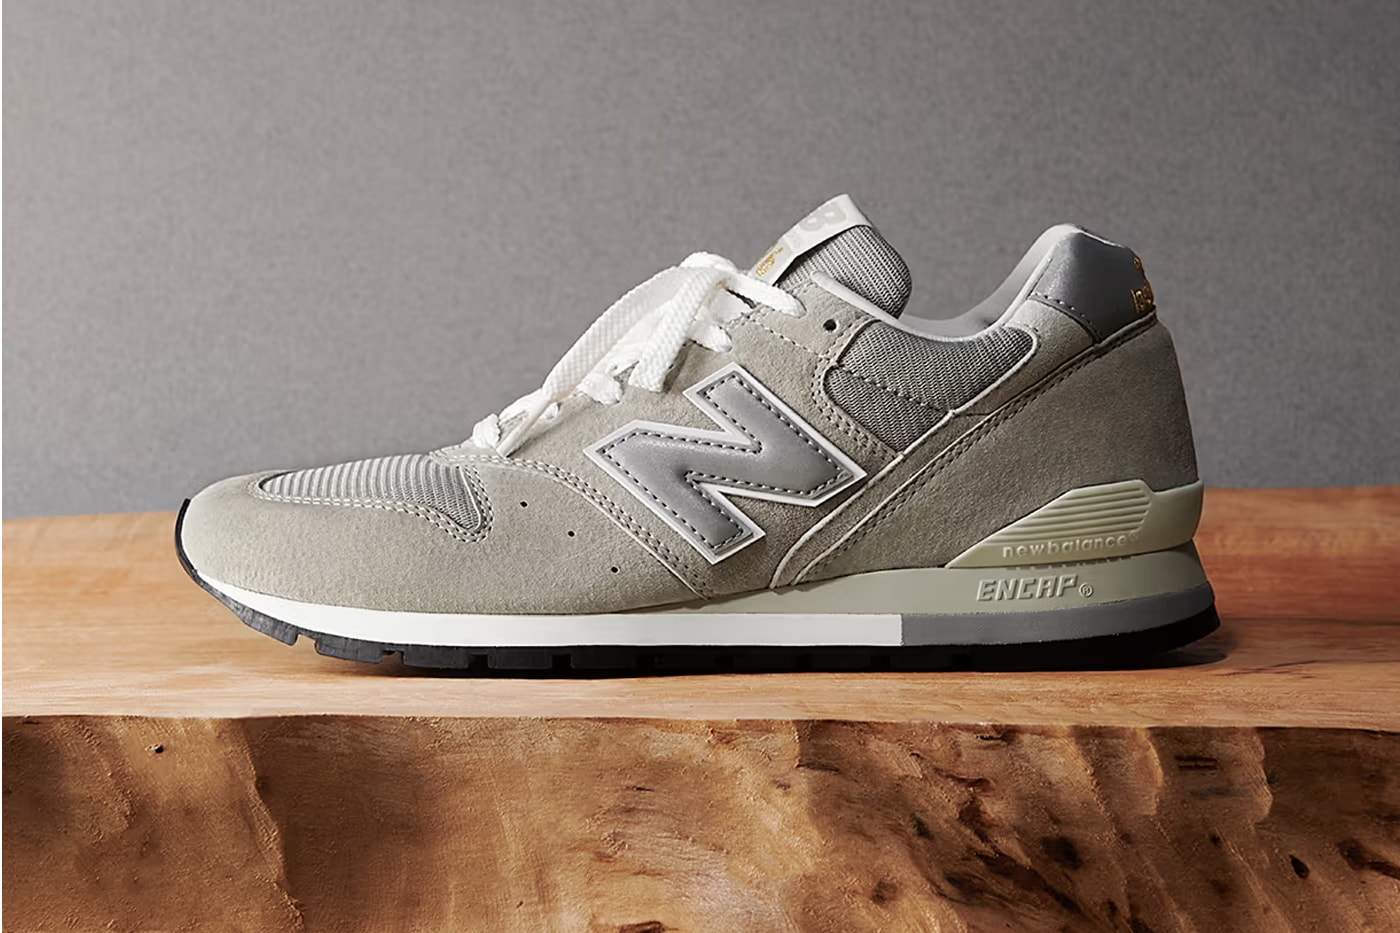 New Balance M996 Made in Japan Grey Colorway | Hypebeast